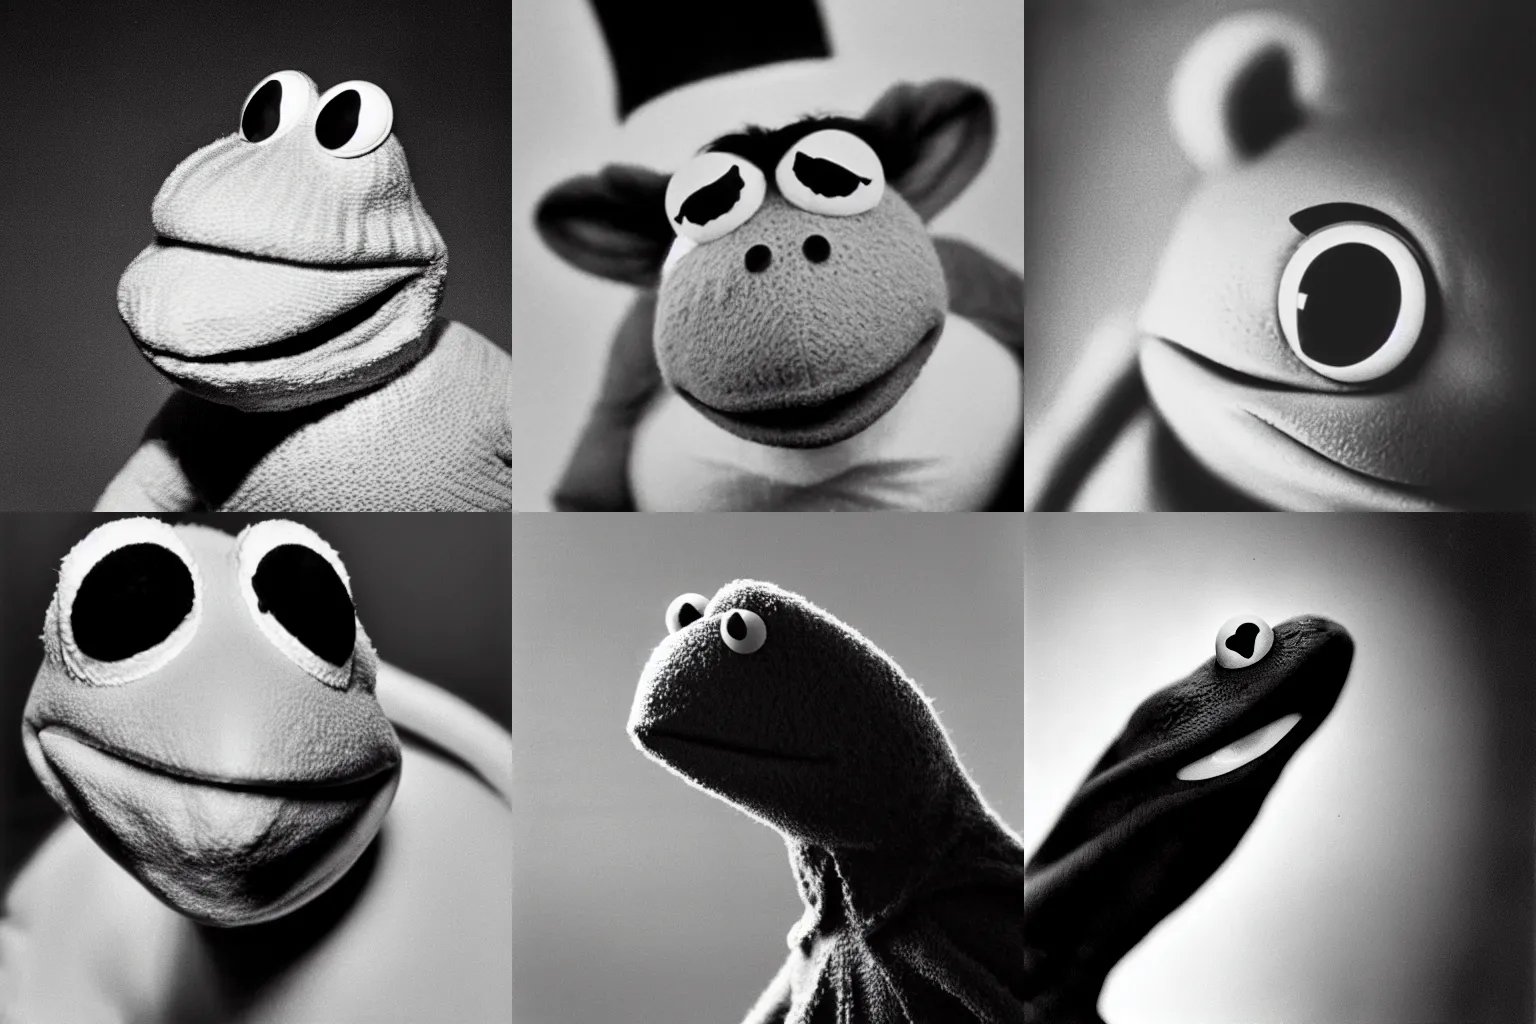 Prompt: A close-up, black & white studio photographic portrait of Kermit the Frog, dramatic backlighting, 1973 photo from Life Magazine